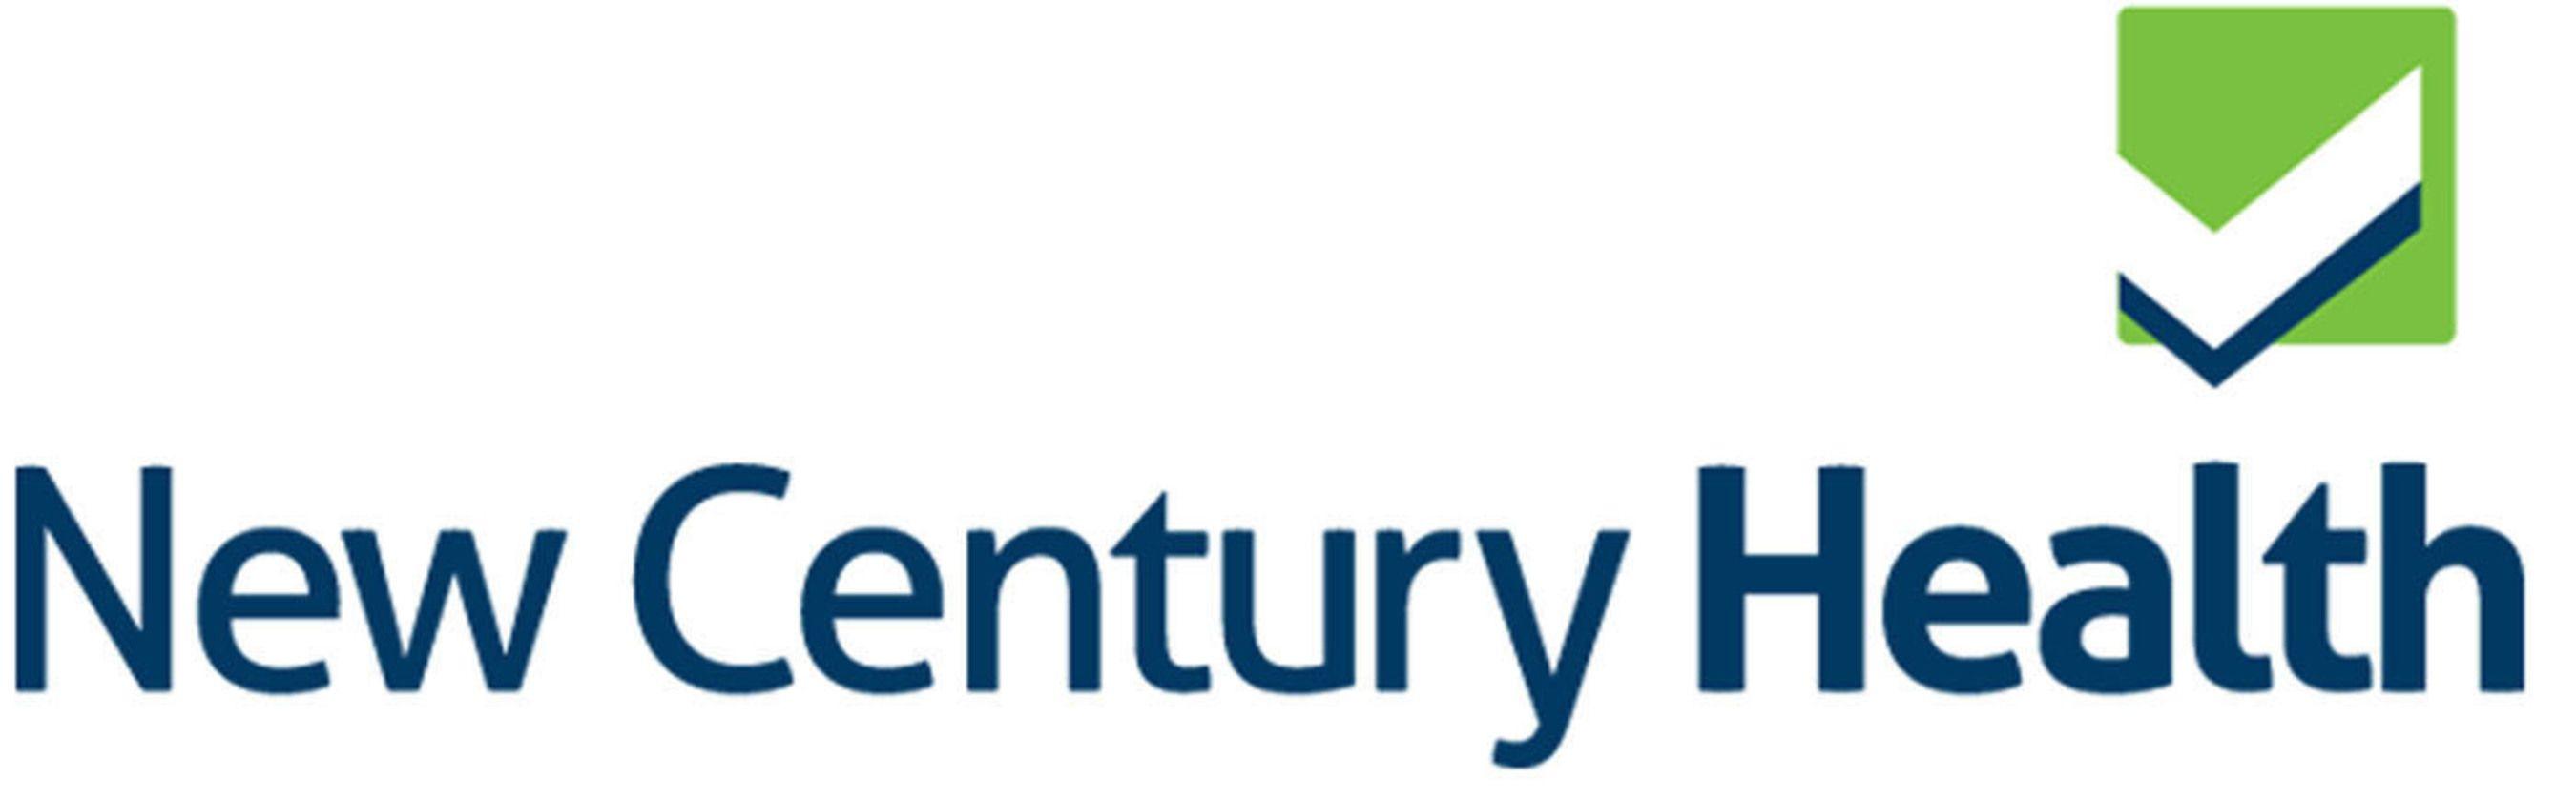 New Century Logo - Simply Healthcare Plans Expands Cancer and Cardiovascular Quality